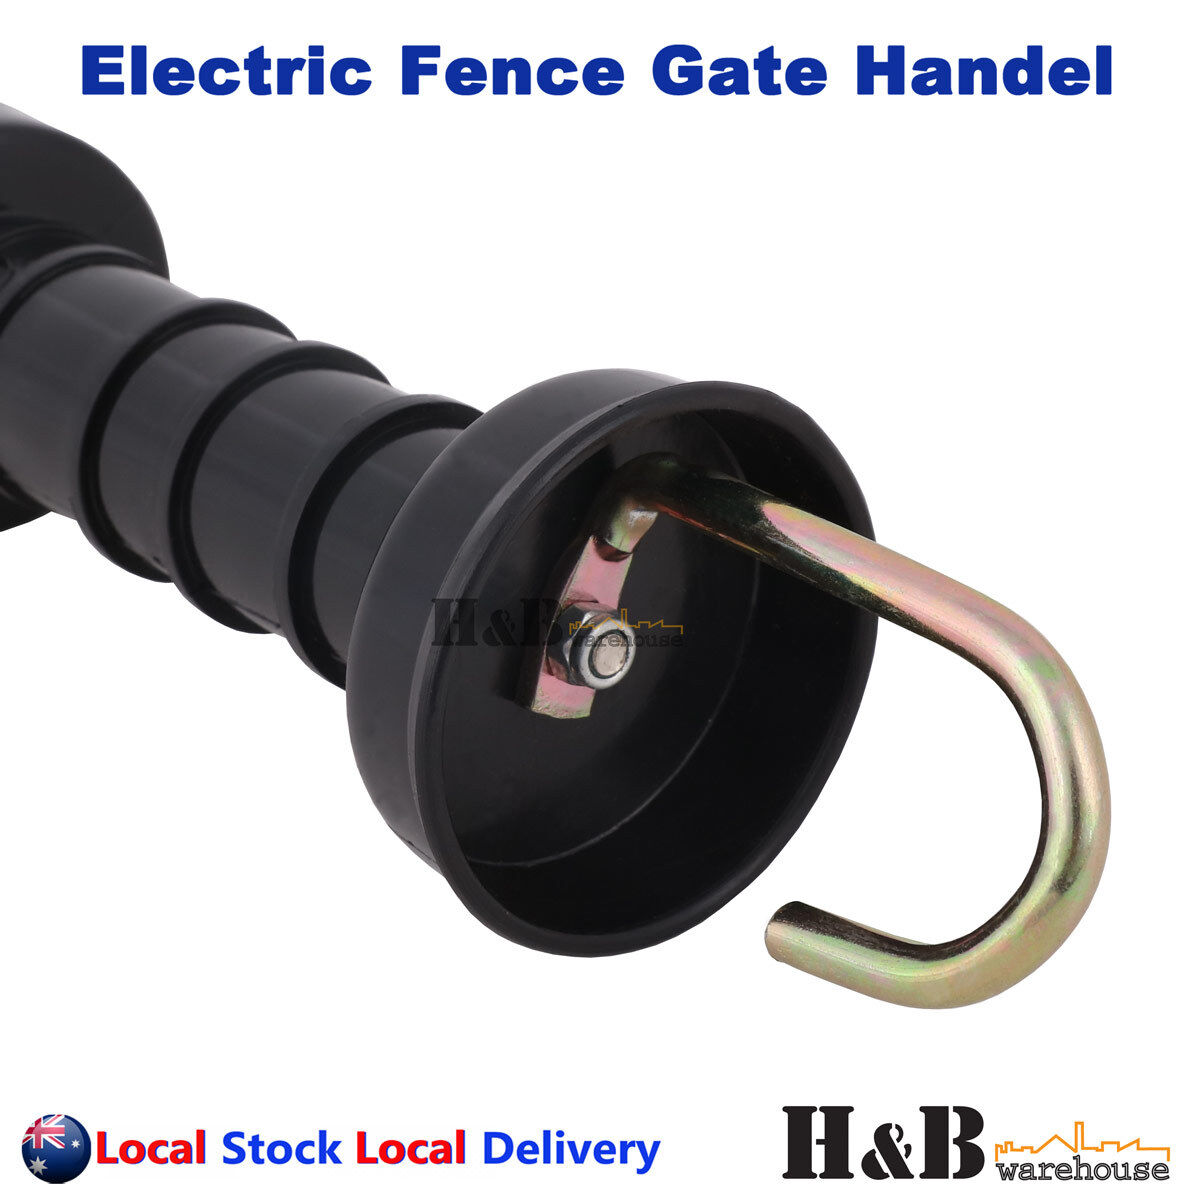 10 Pcs Electric Fence Gate Handle Insulated Spring Handles Black